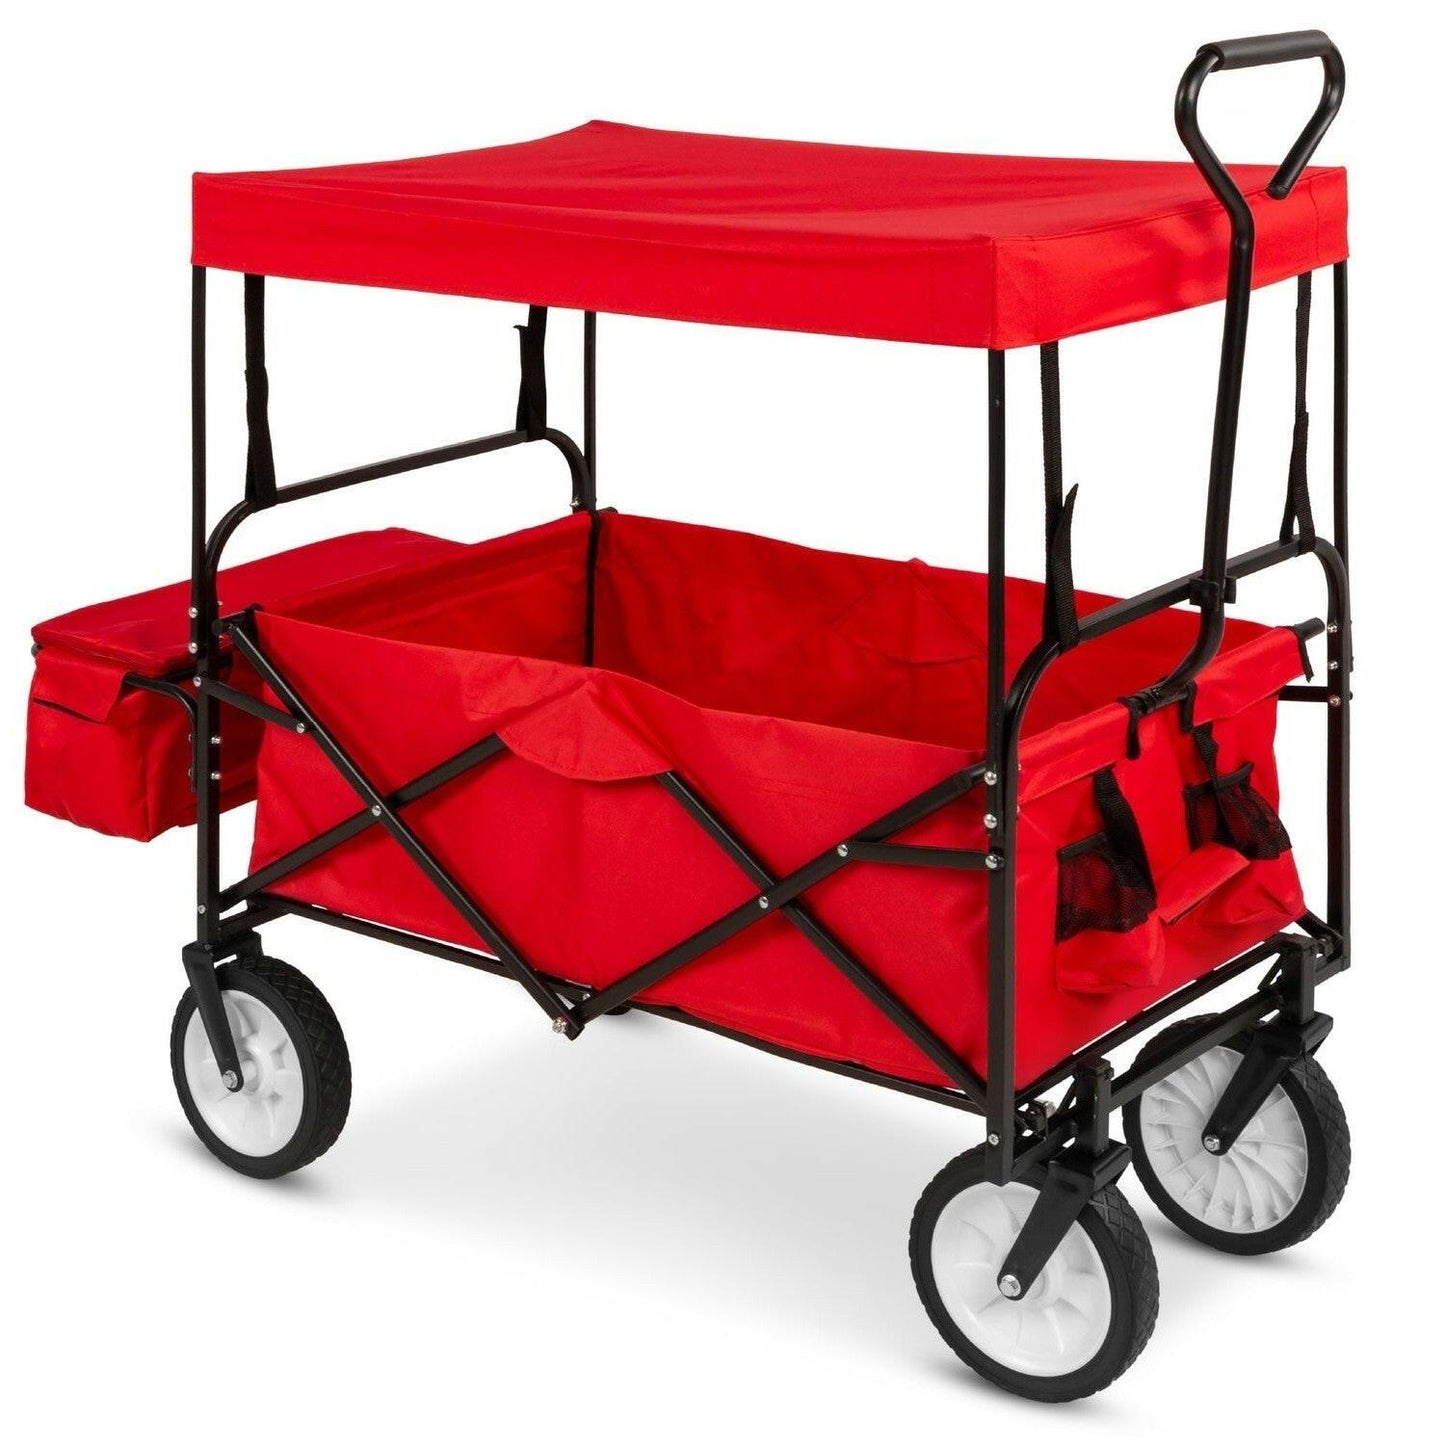 Collapsible Utility Wagon Cart Indoor/Outdoor with Canopy - Red - FurniFindUSA